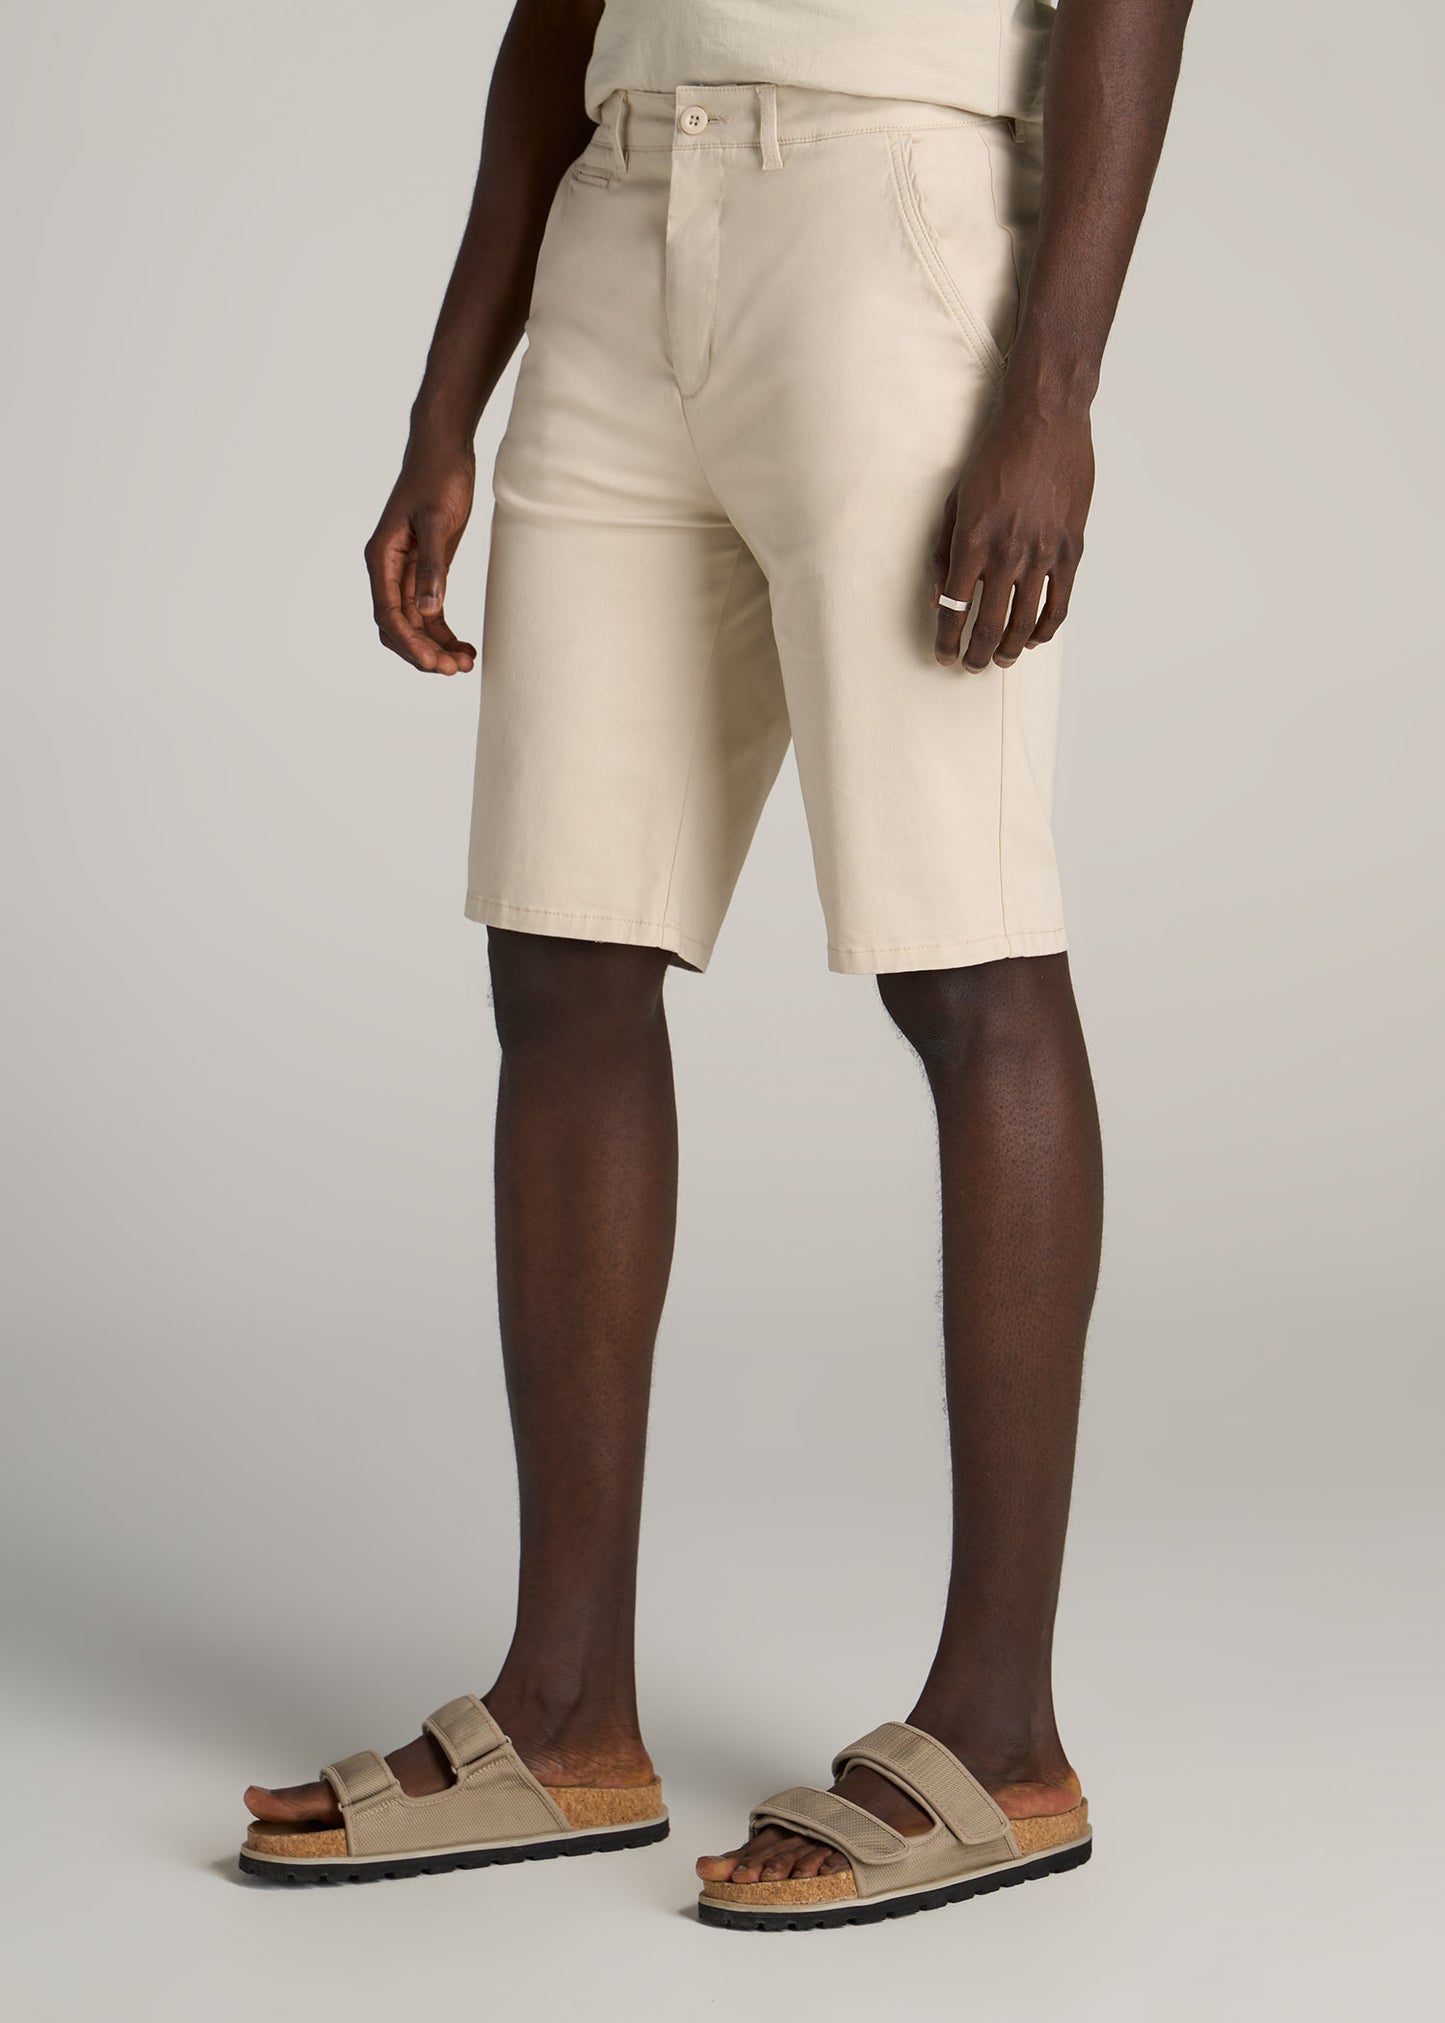     American-Tall-Men-Chino-Shorts-Soft-Beige-side